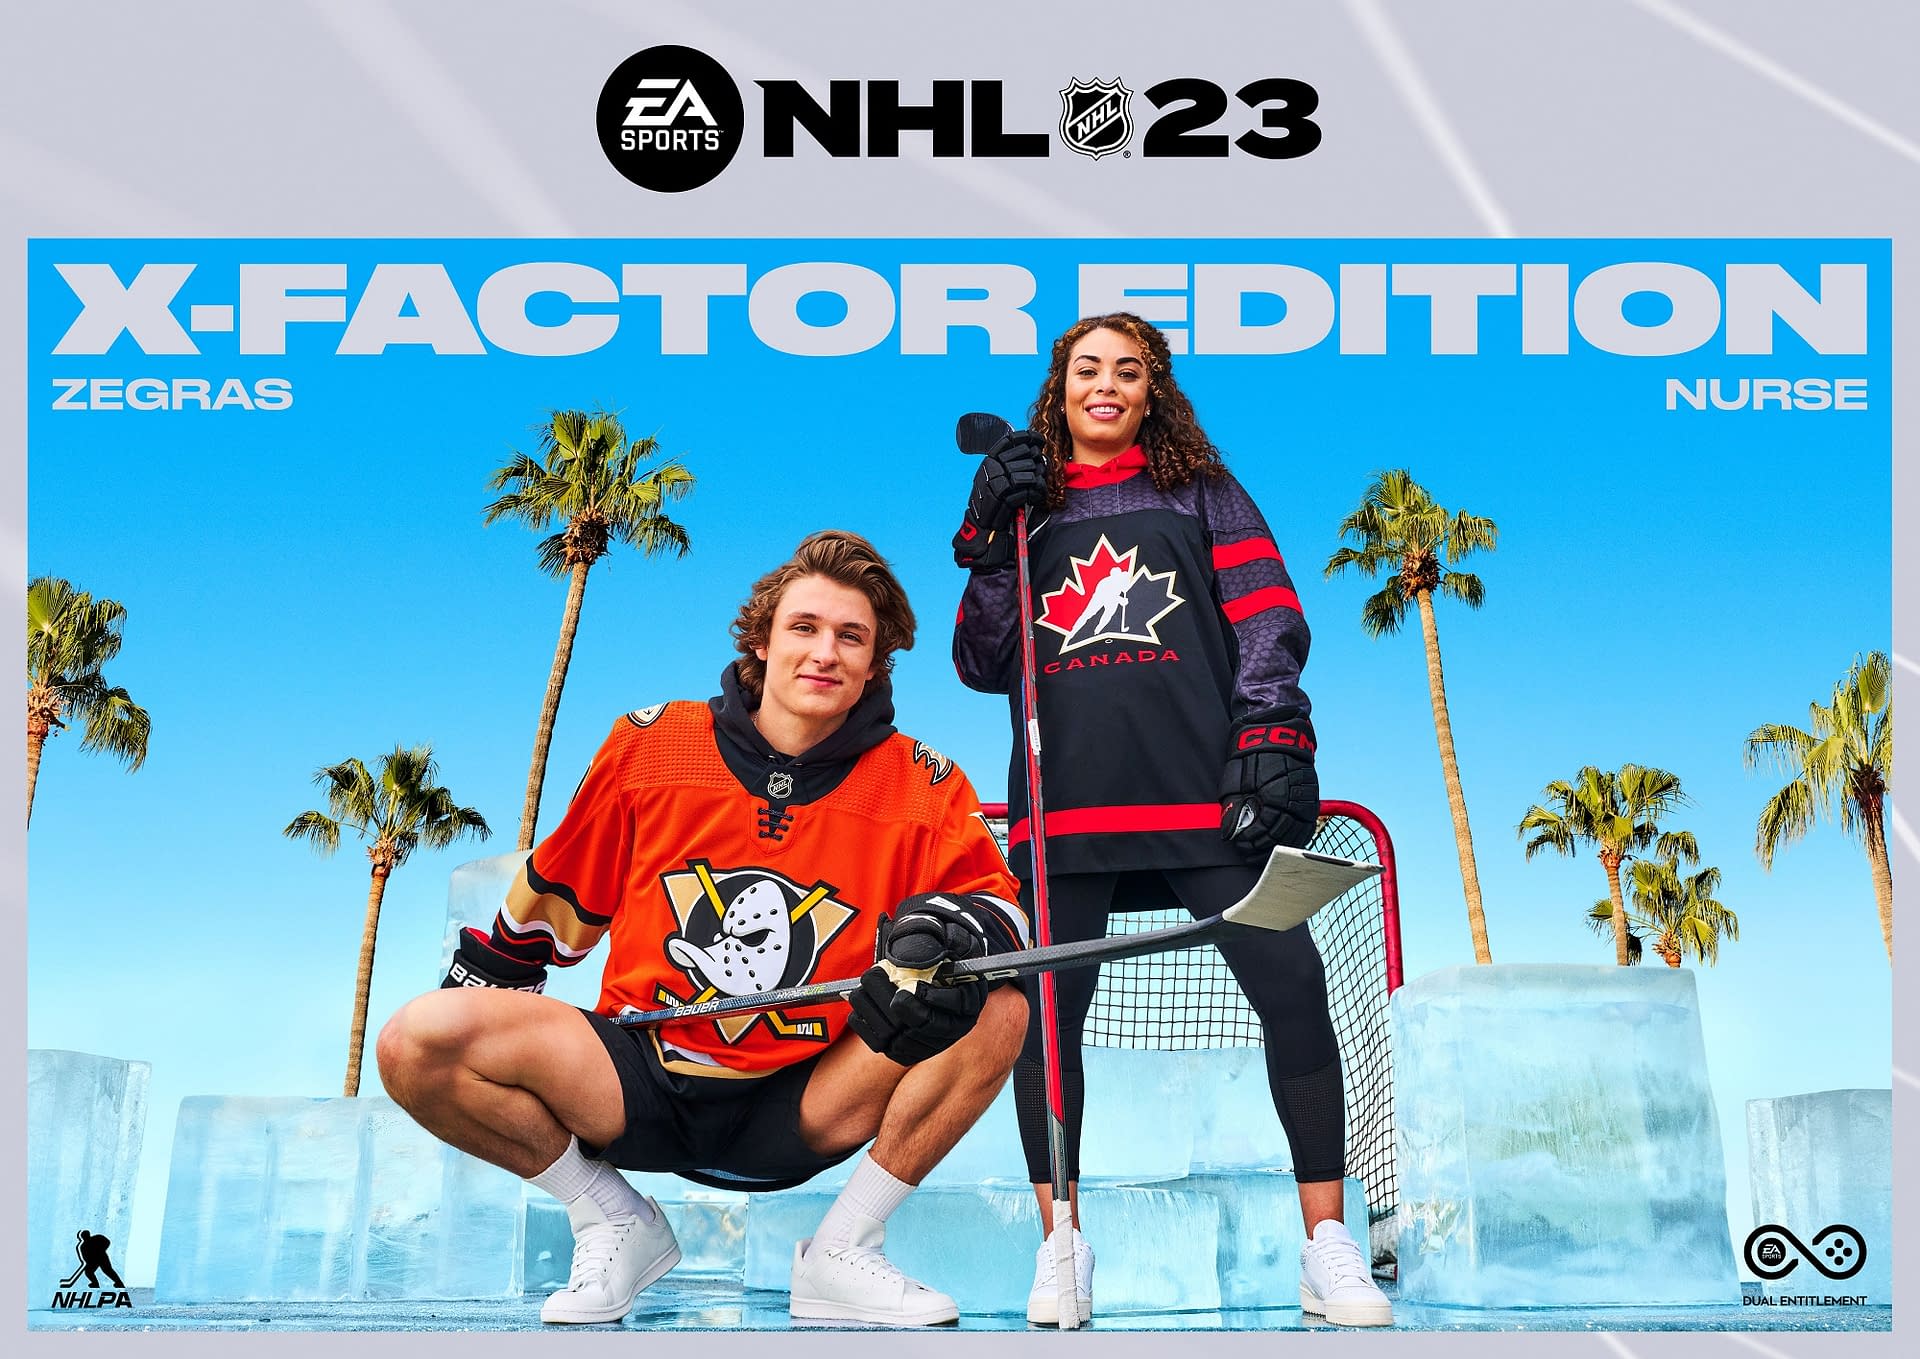 NHL 23 Cross-Console Private Matches Coming to HUT in March 2023